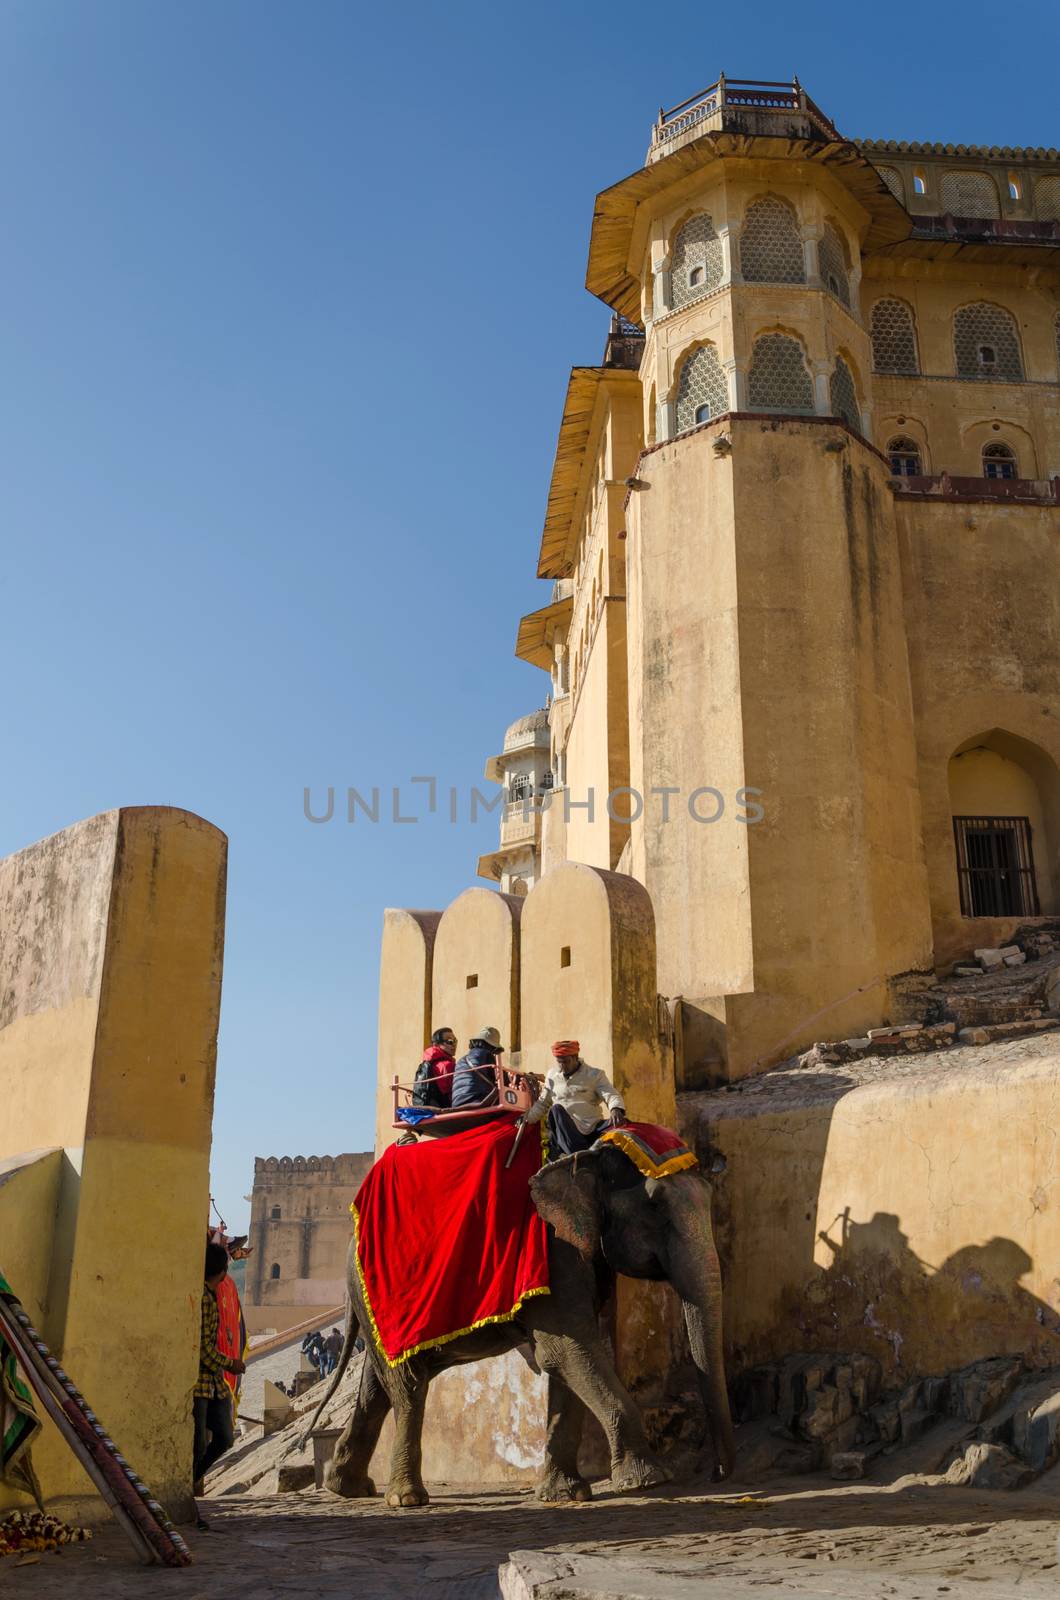 Jaipur, India - December 29, 2014: Decorated elephant carries tourists to Amber Fort on December 29, 2014 in Jaipur, Rajasthan, India.